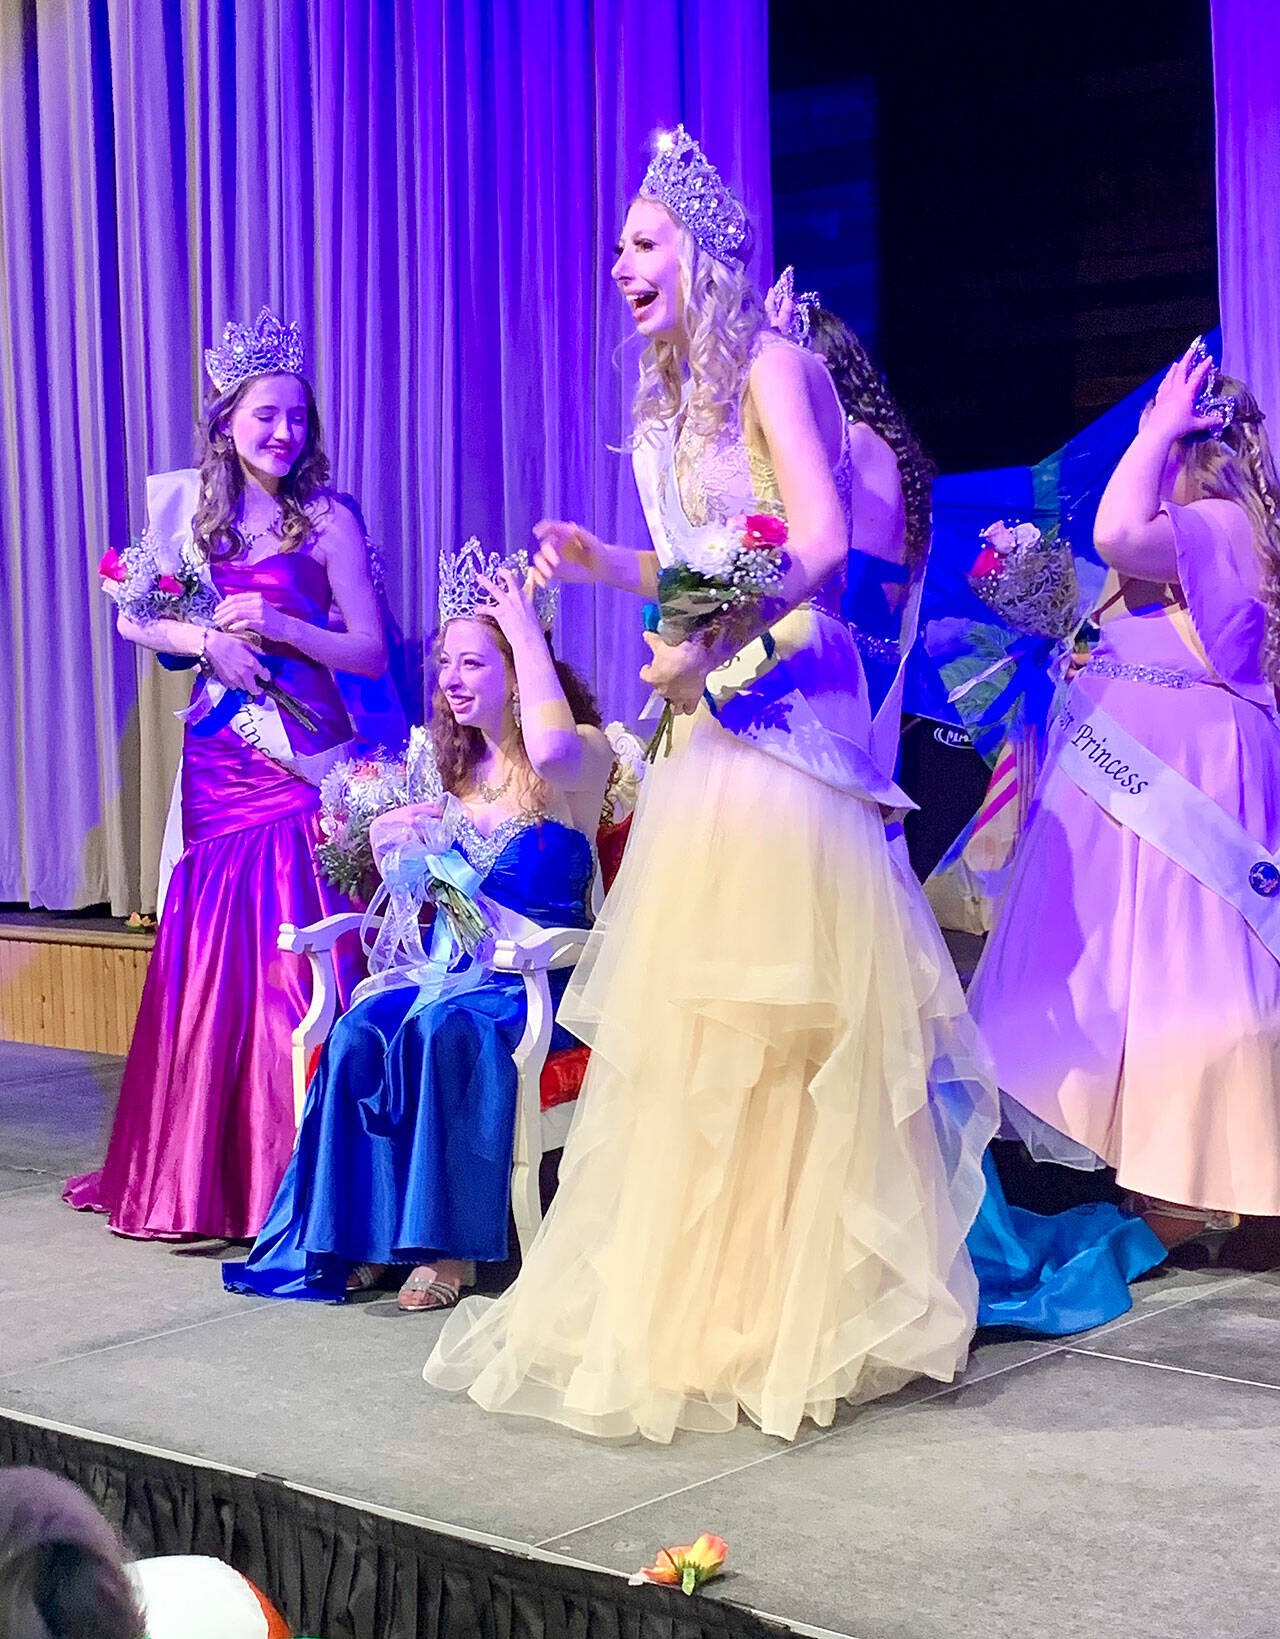 A stunned Rebecca Greenberg (sitting on throne) is crowned Fathoms O’ Fun Festival’s Queen and her fellow contestants quickly gather around to congratulate her. (Bob Smith | Kitsap Daily News)